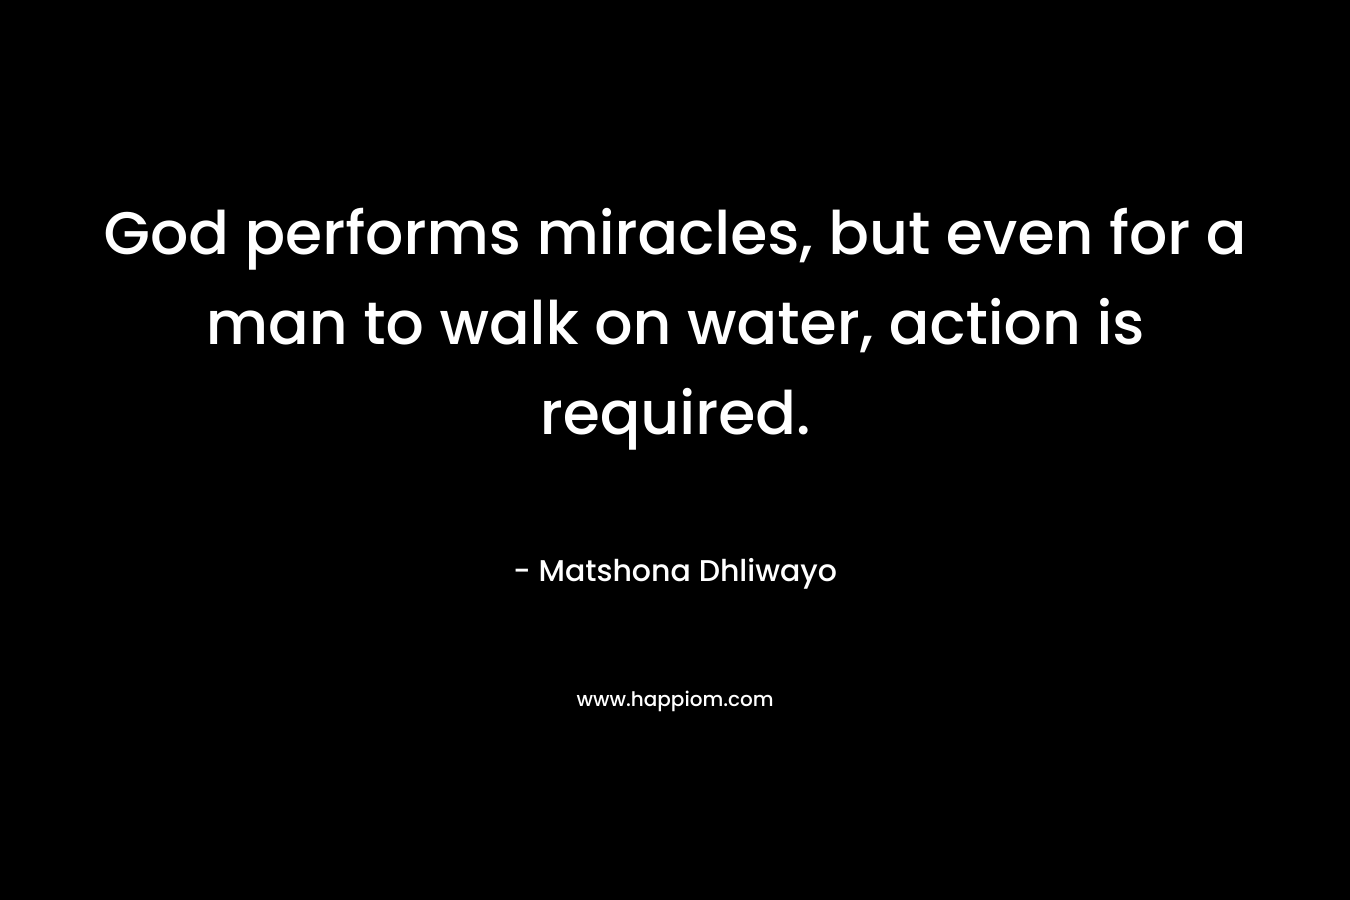 God performs miracles, but even for a man to walk on water, action is required.